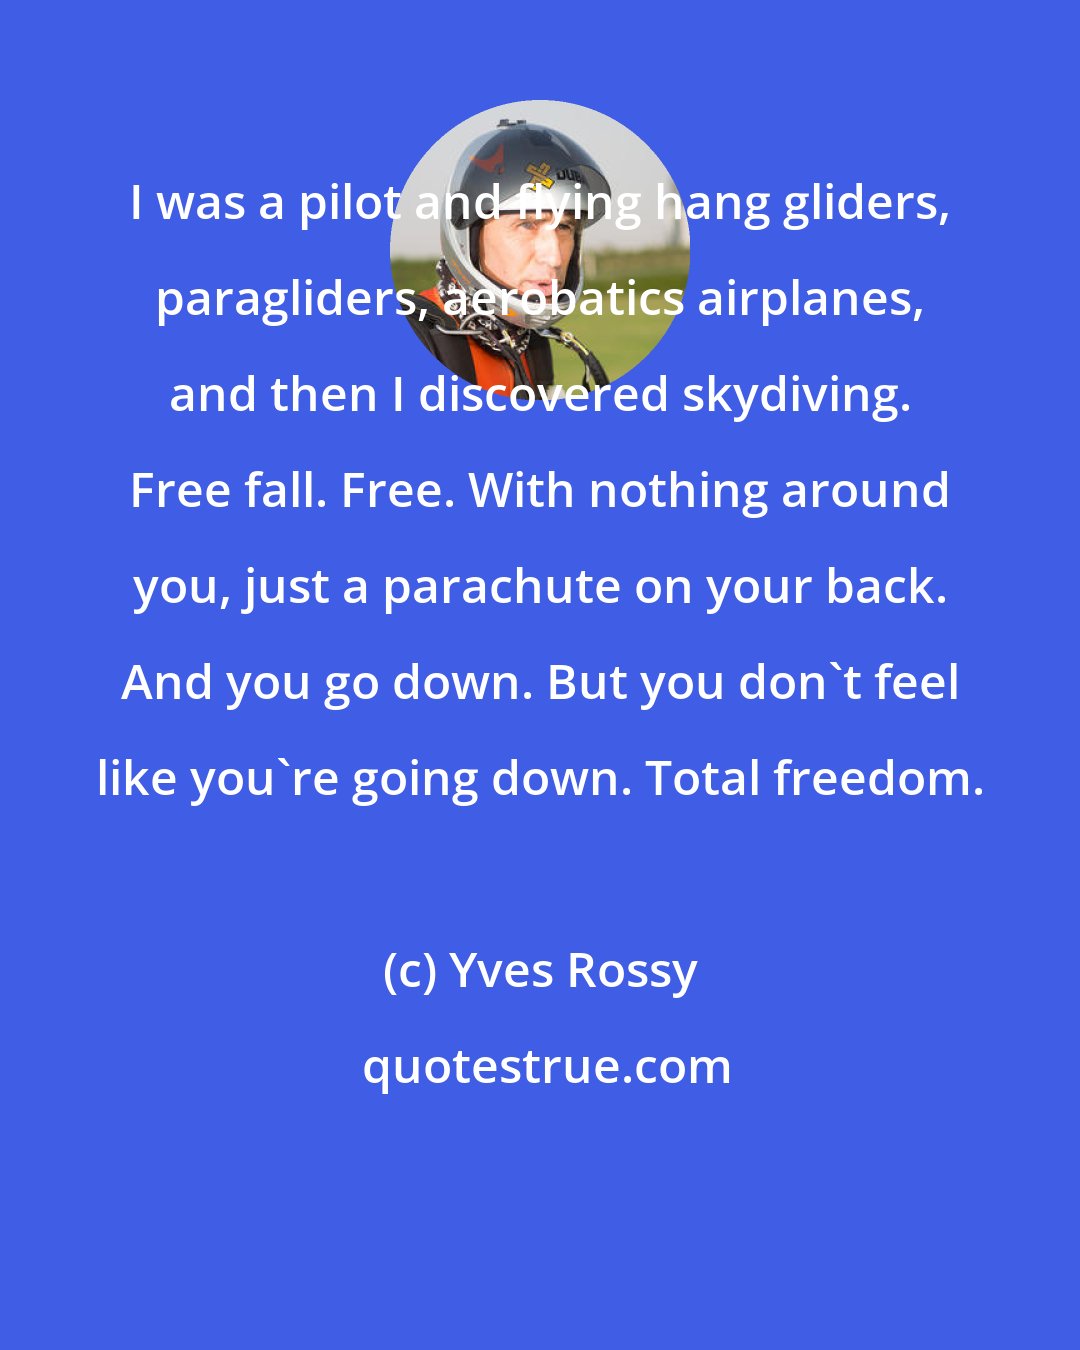 Yves Rossy: I was a pilot and flying hang gliders, paragliders, aerobatics airplanes, and then I discovered skydiving. Free fall. Free. With nothing around you, just a parachute on your back. And you go down. But you don't feel like you're going down. Total freedom.